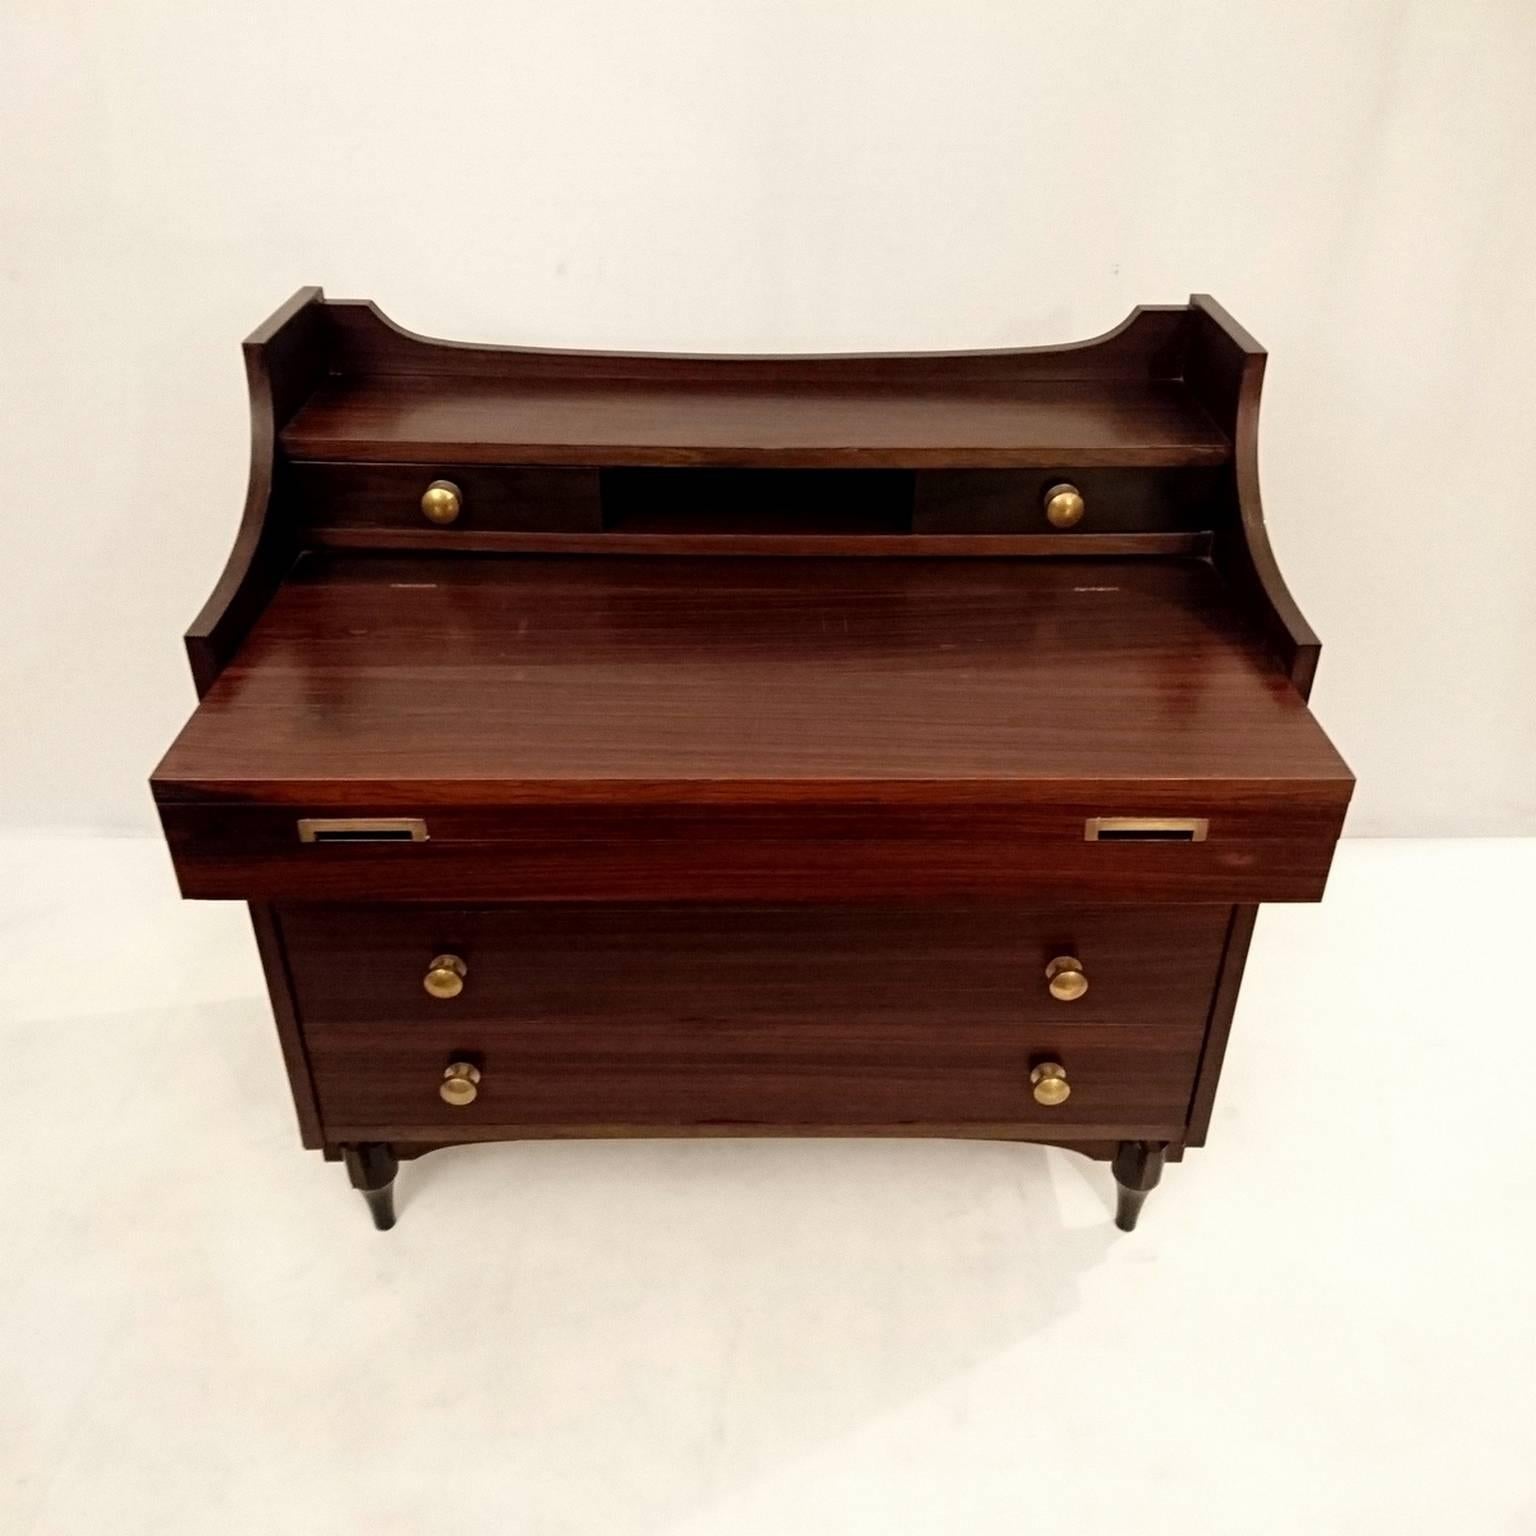 This model SC284 chest of drawers or dressing table was designed by Claudio Salocchi and produced by Sormani, Italy in 1963. It is made from rosewood with brass details. The top drawer contains a fold-out mirror so it can be utilized as a dressing